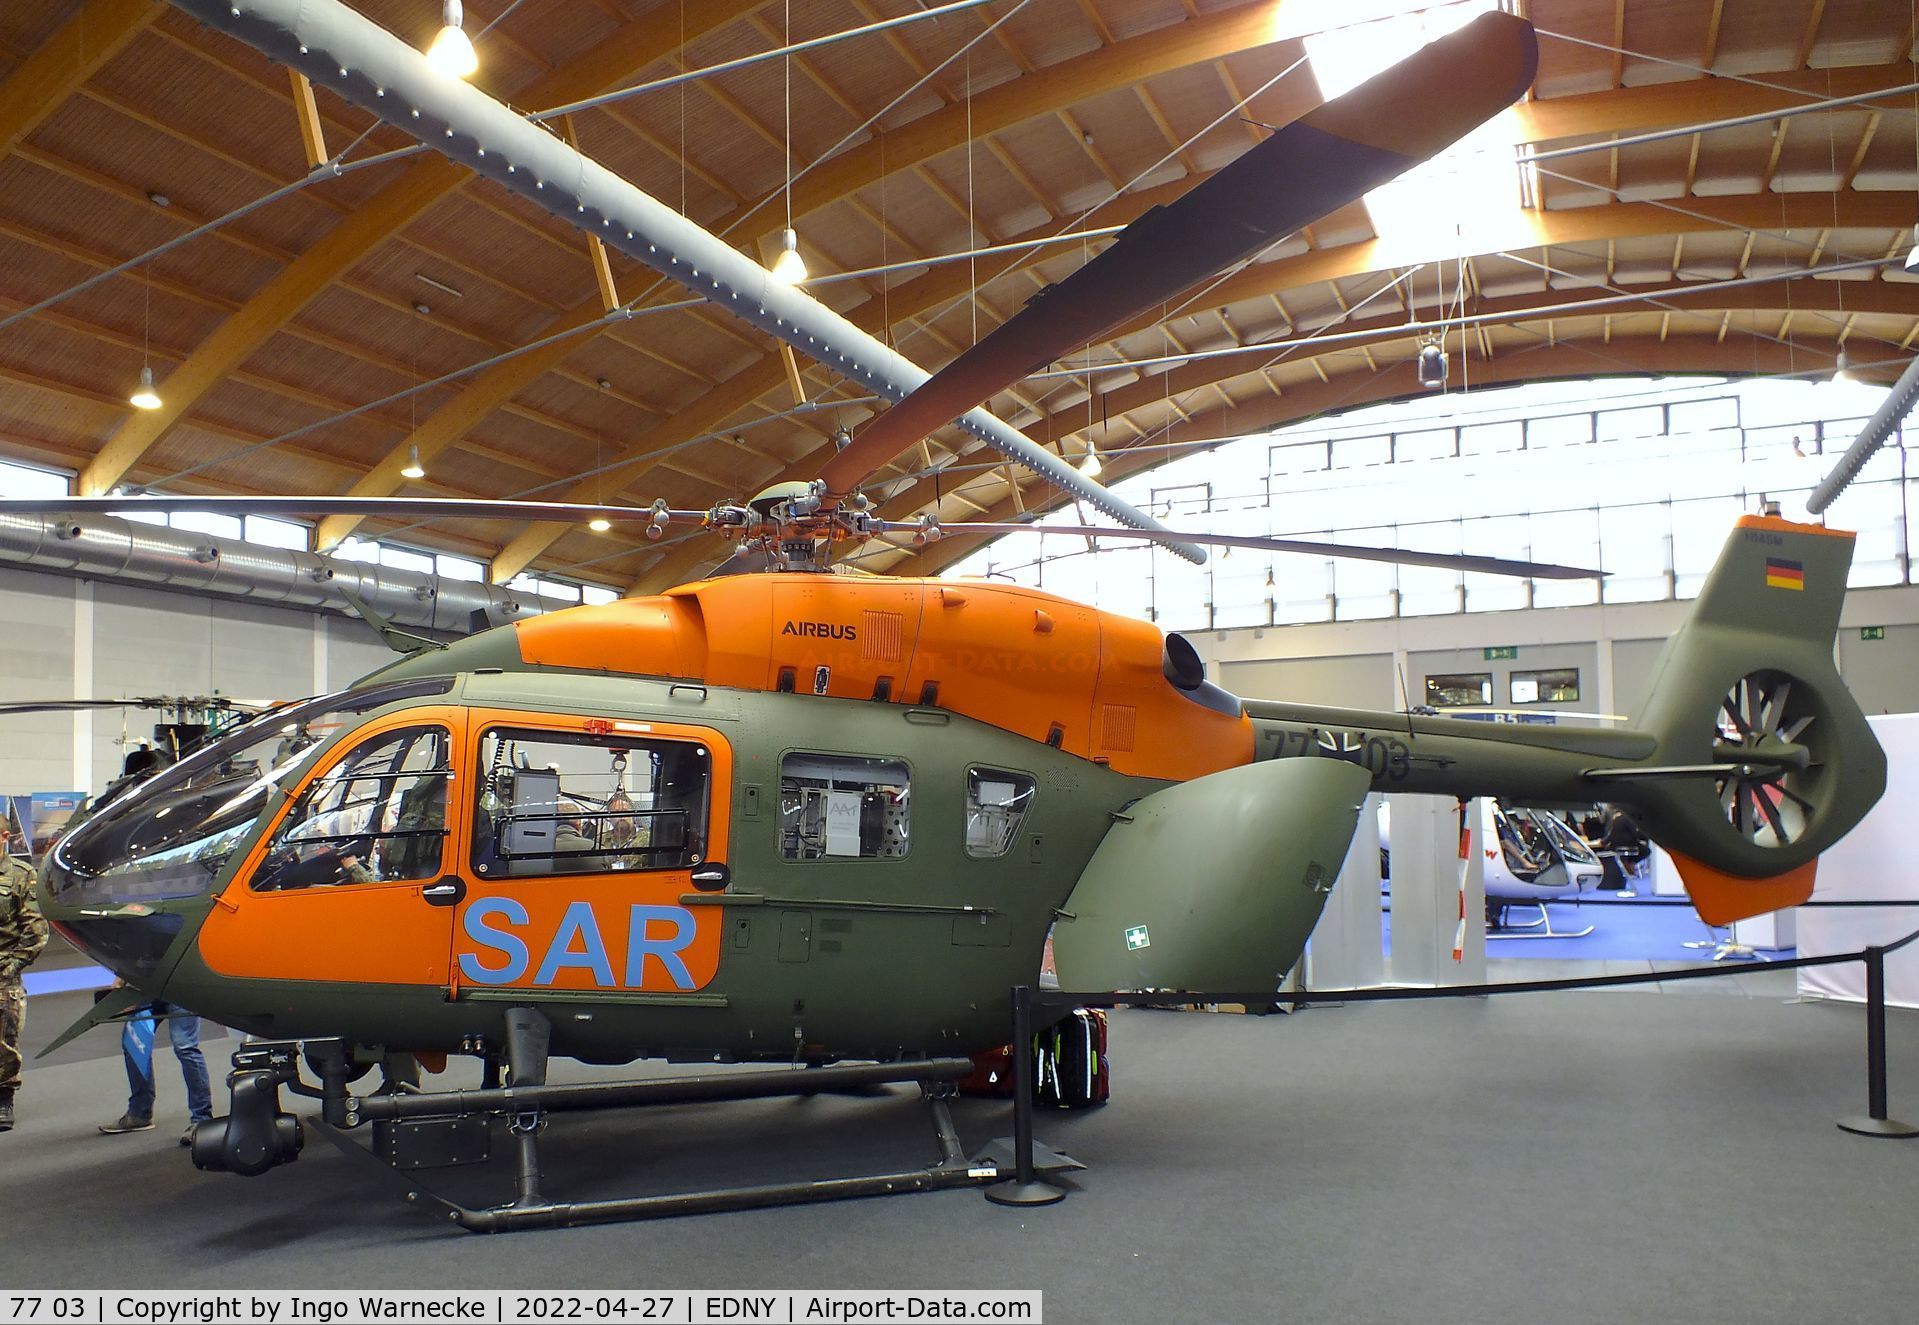 77 03, 2022 Airbus Helicopters H-145M C/N 20308, Airbus Helicopters H145M of Heeresflieger (German army aviation) at the AERO 2022, Friedrichshafen